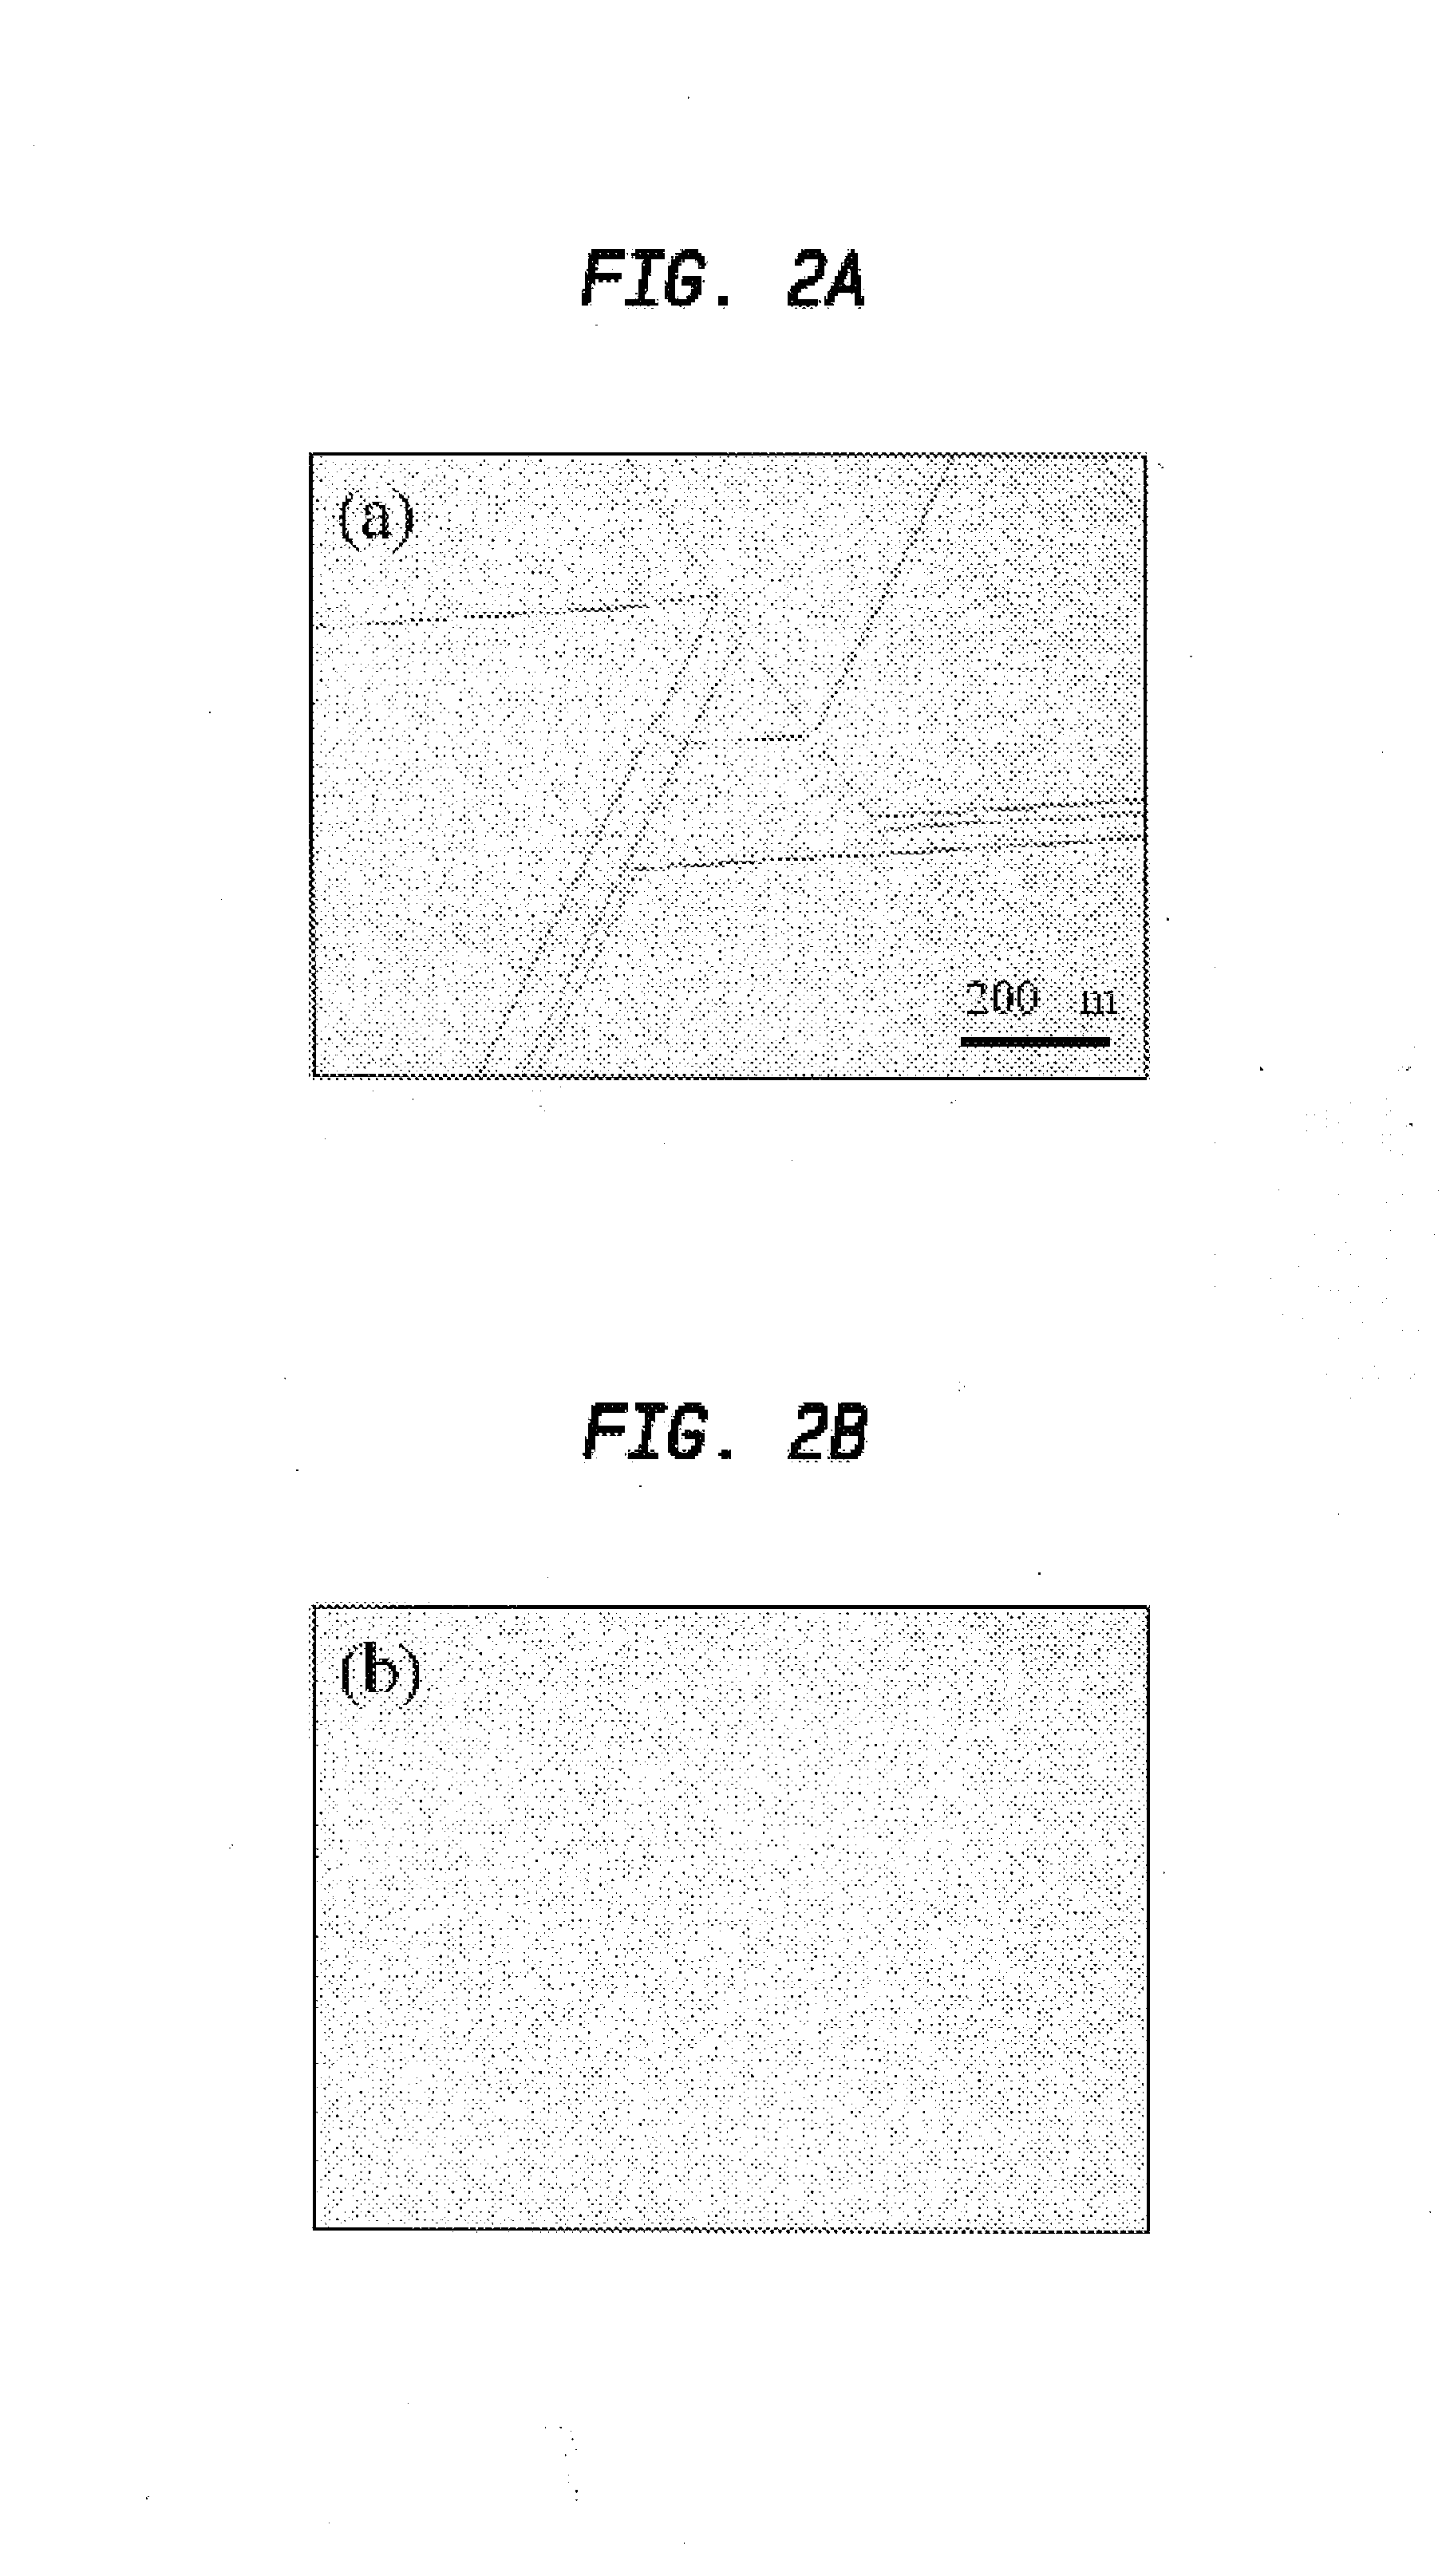 Semiconductor structures for gallium nitride-based devices